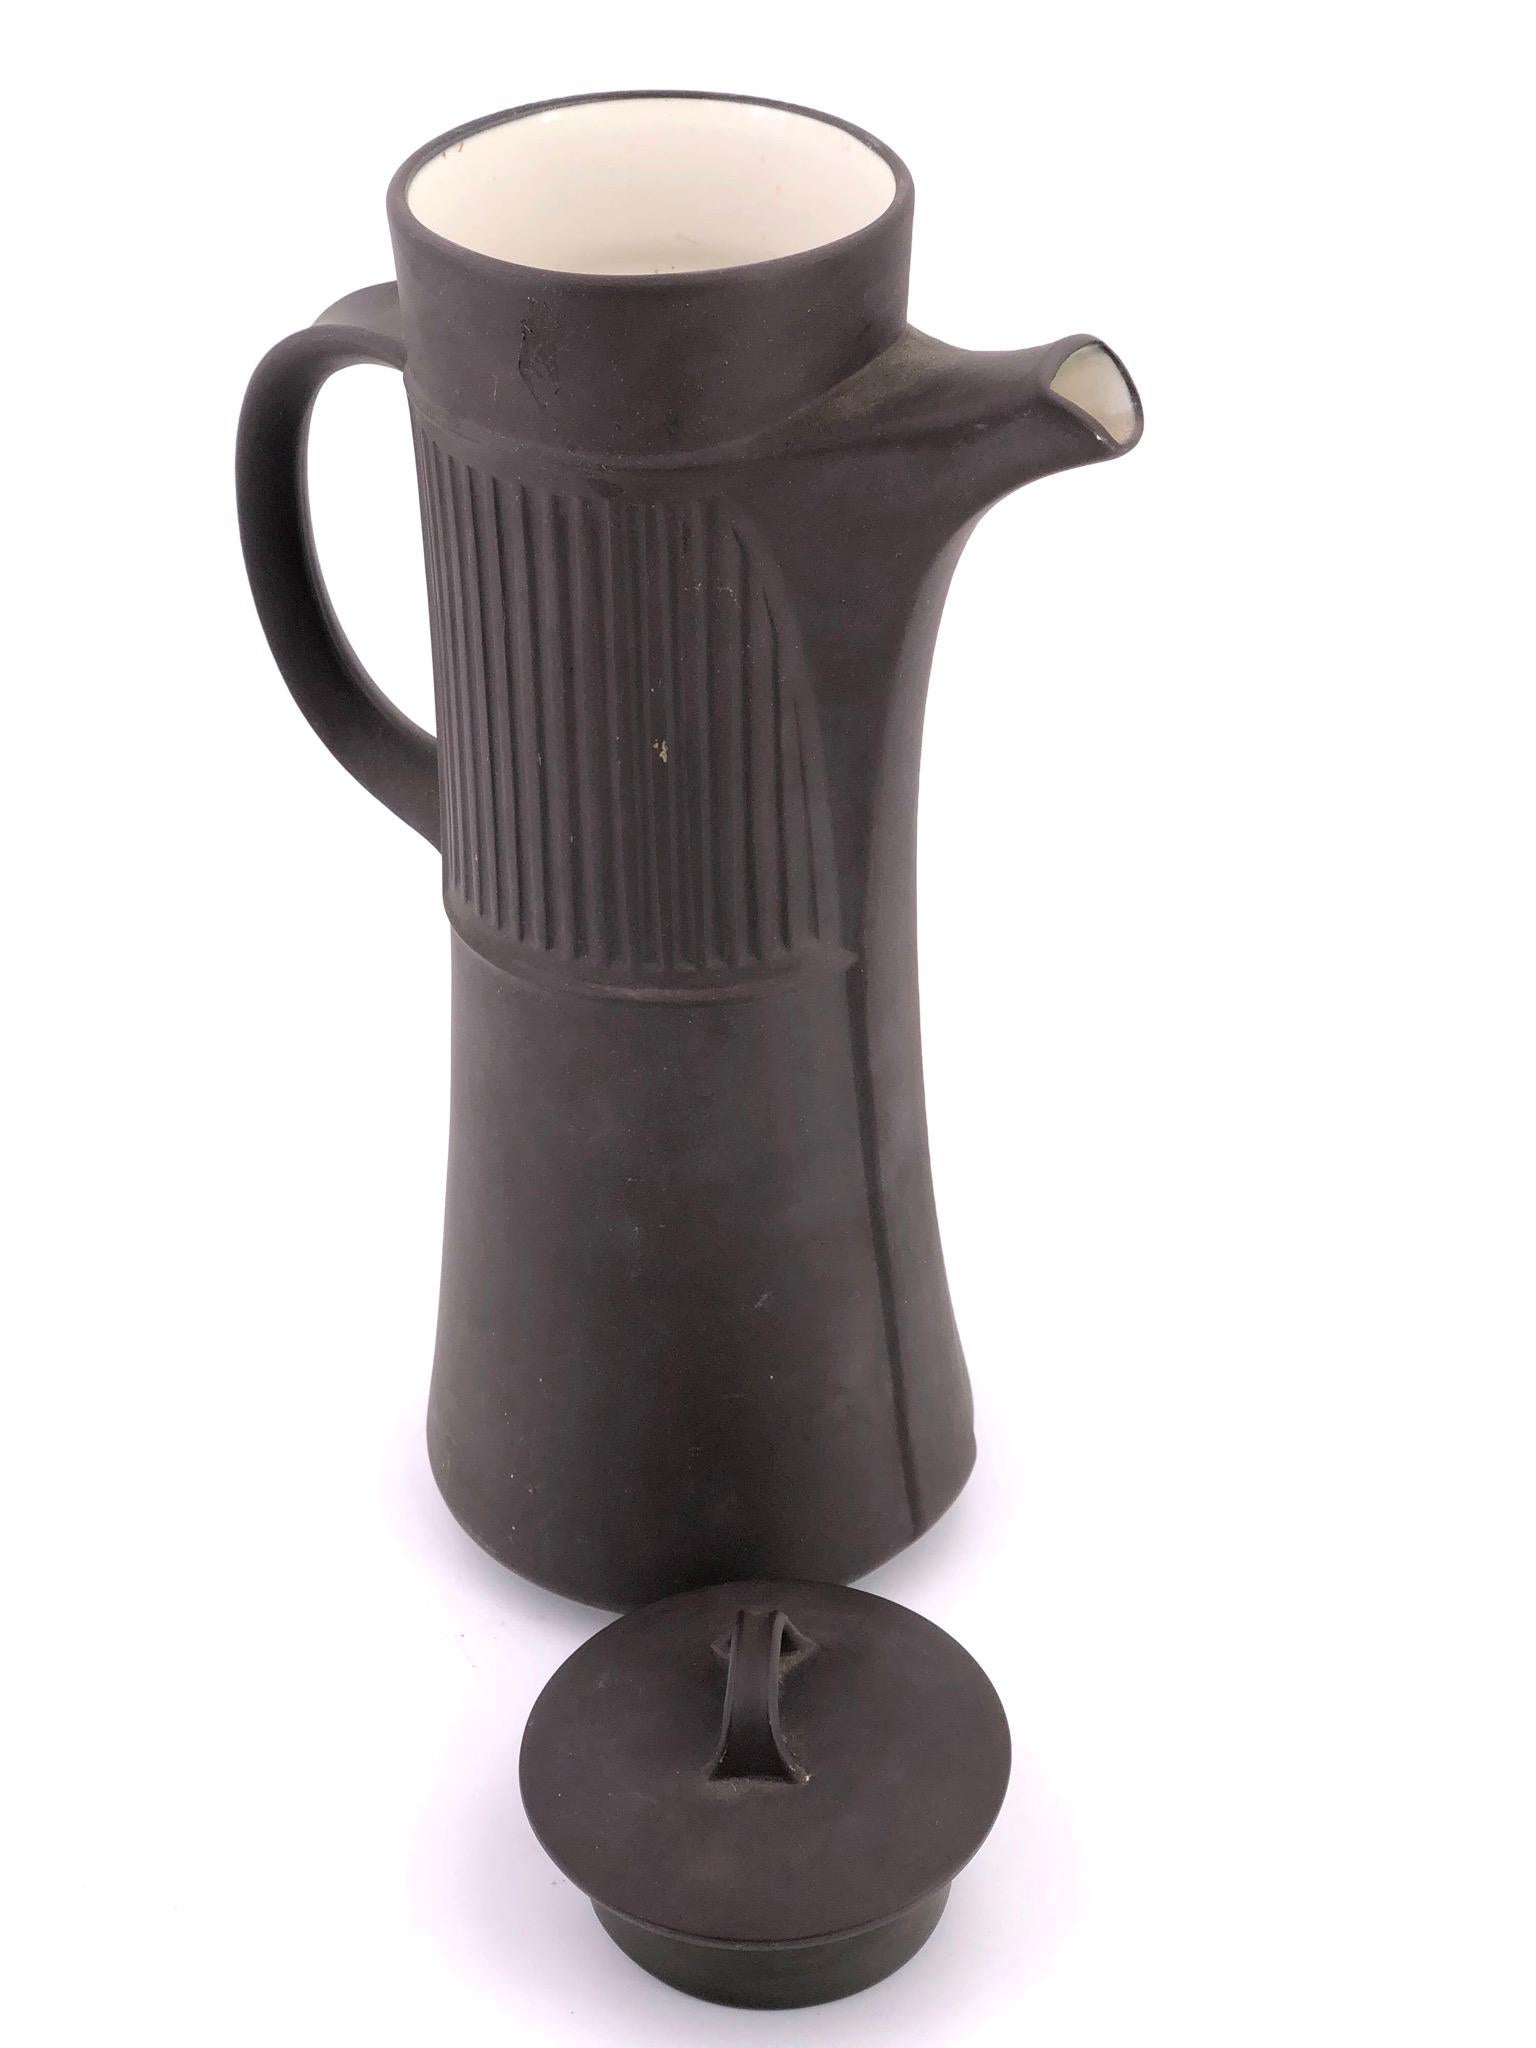 Beautiful tall ceramic coffee pot designed by Quistgaard for Dansk circa 1950s, in great condition no chips or cracks.